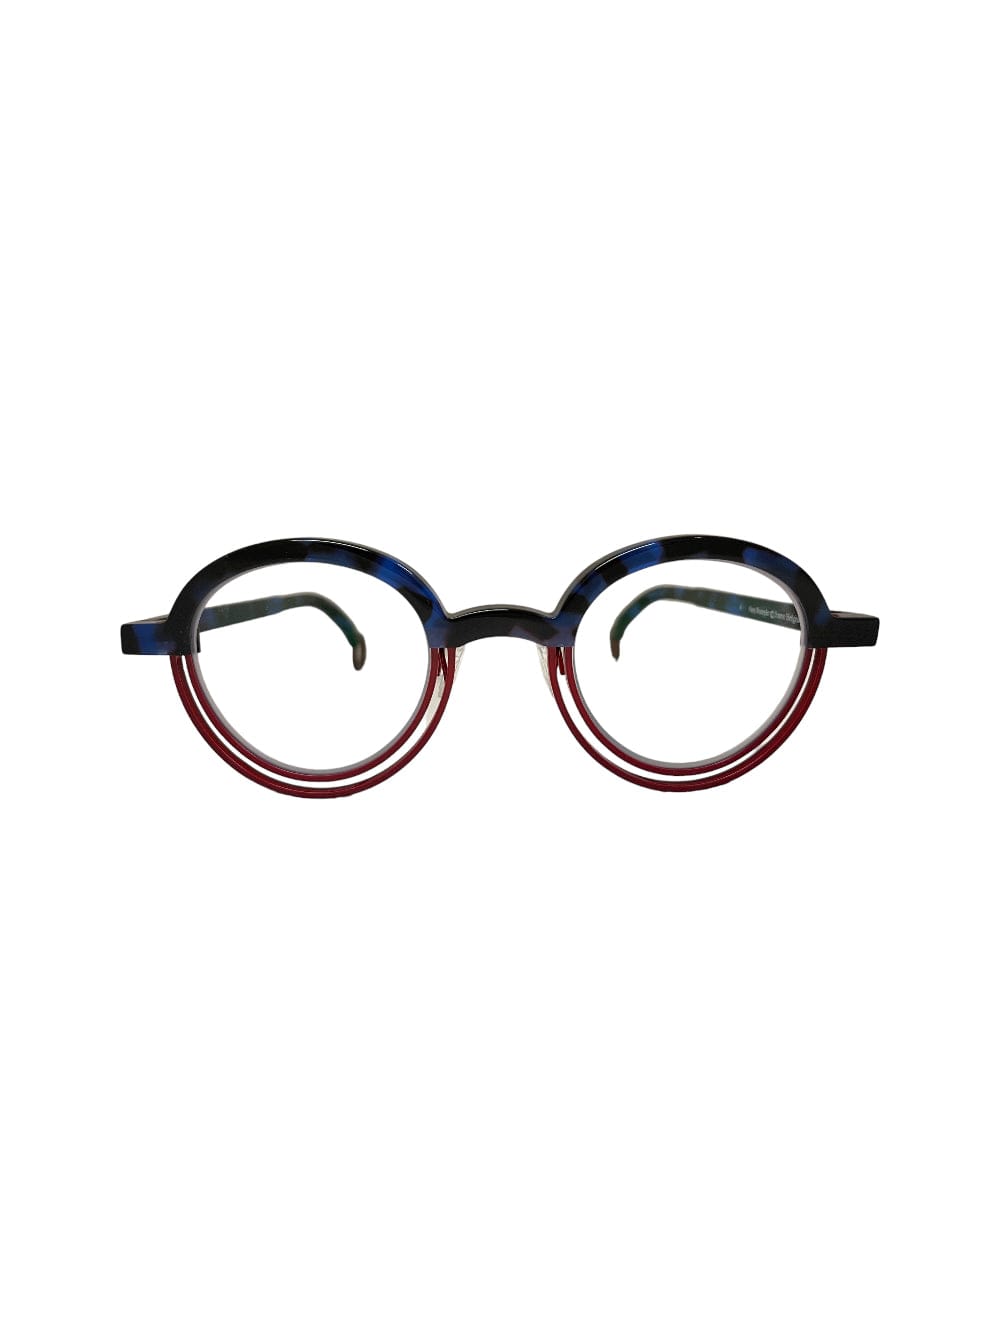 Theo Bumper - Red & Blue Glasses